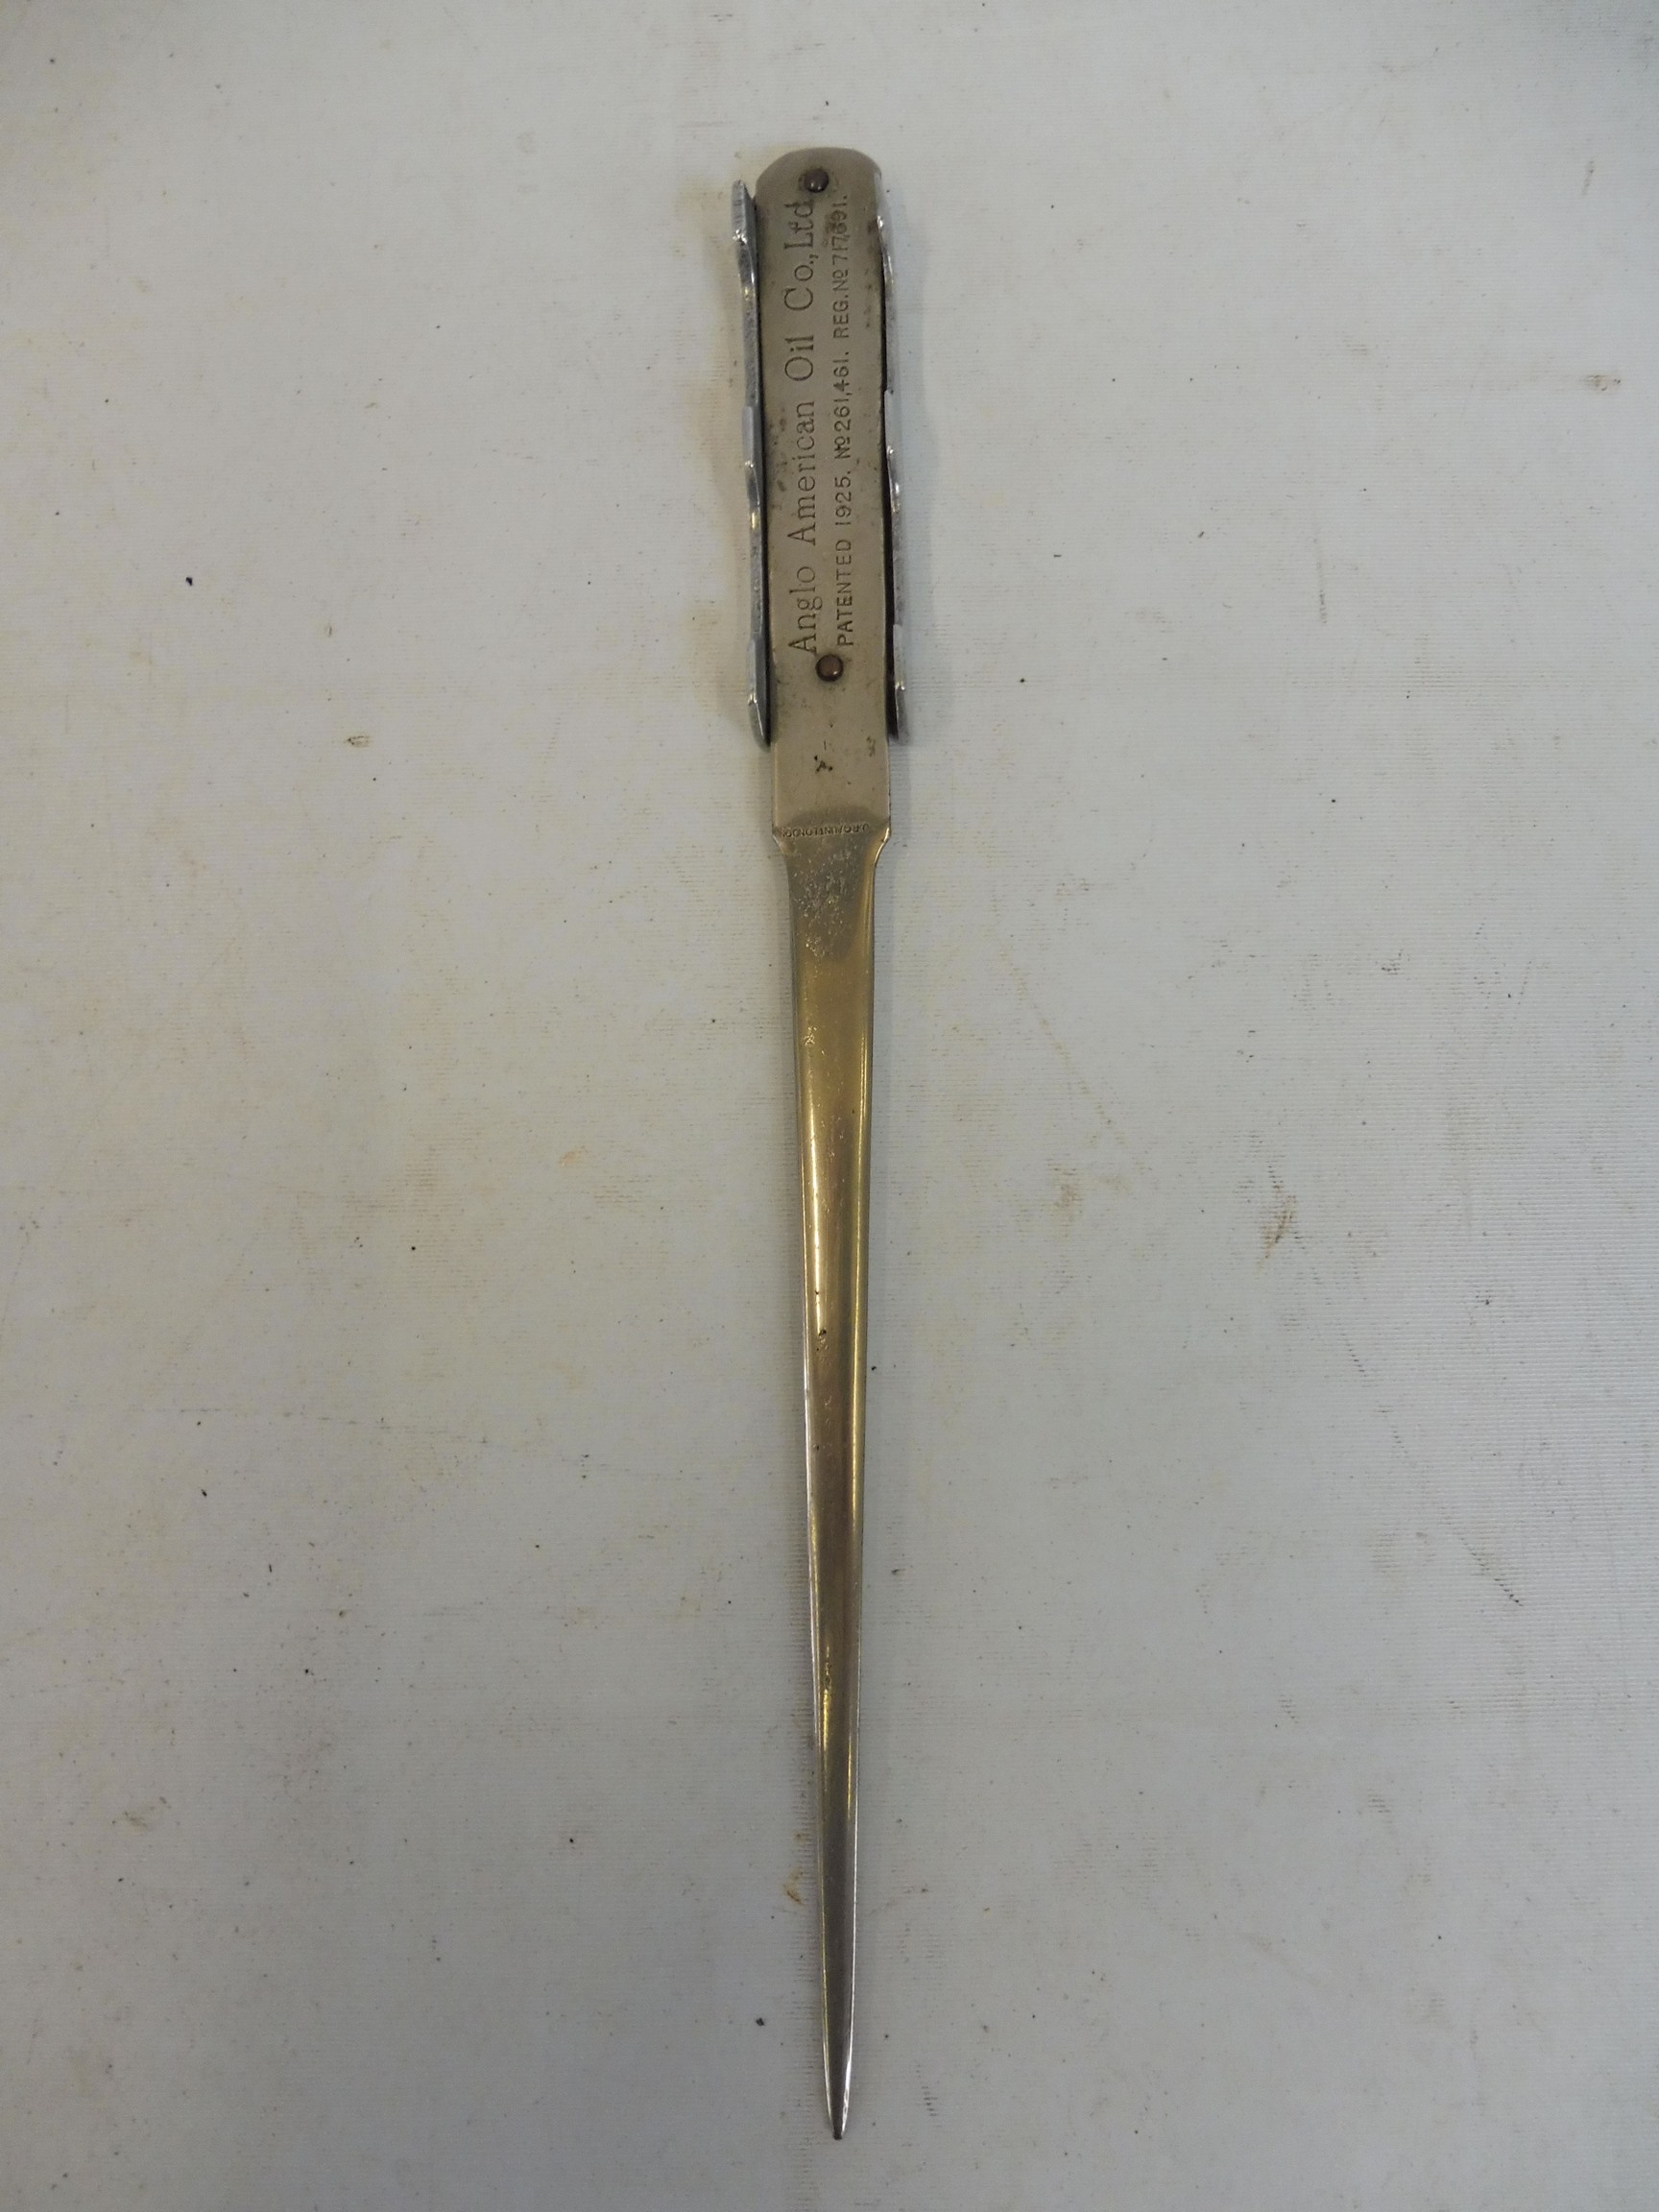 An Anglo American Oil Co. Ltd. letter opener dated 1925. - Image 2 of 2